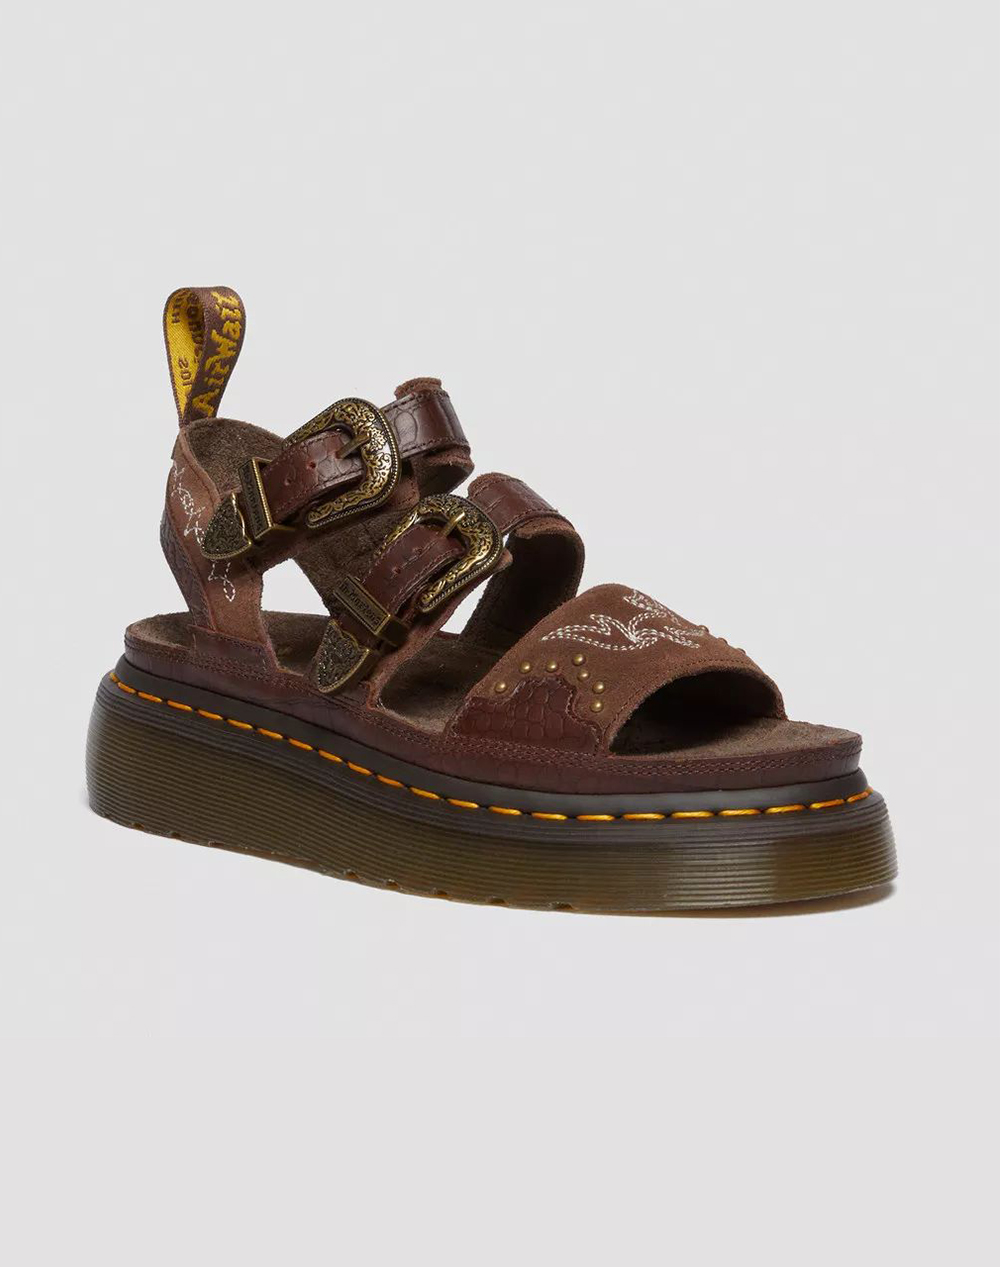 DRMARTENS GRYPHON QUAD CLASSIC PULL UP + EH SUEDE